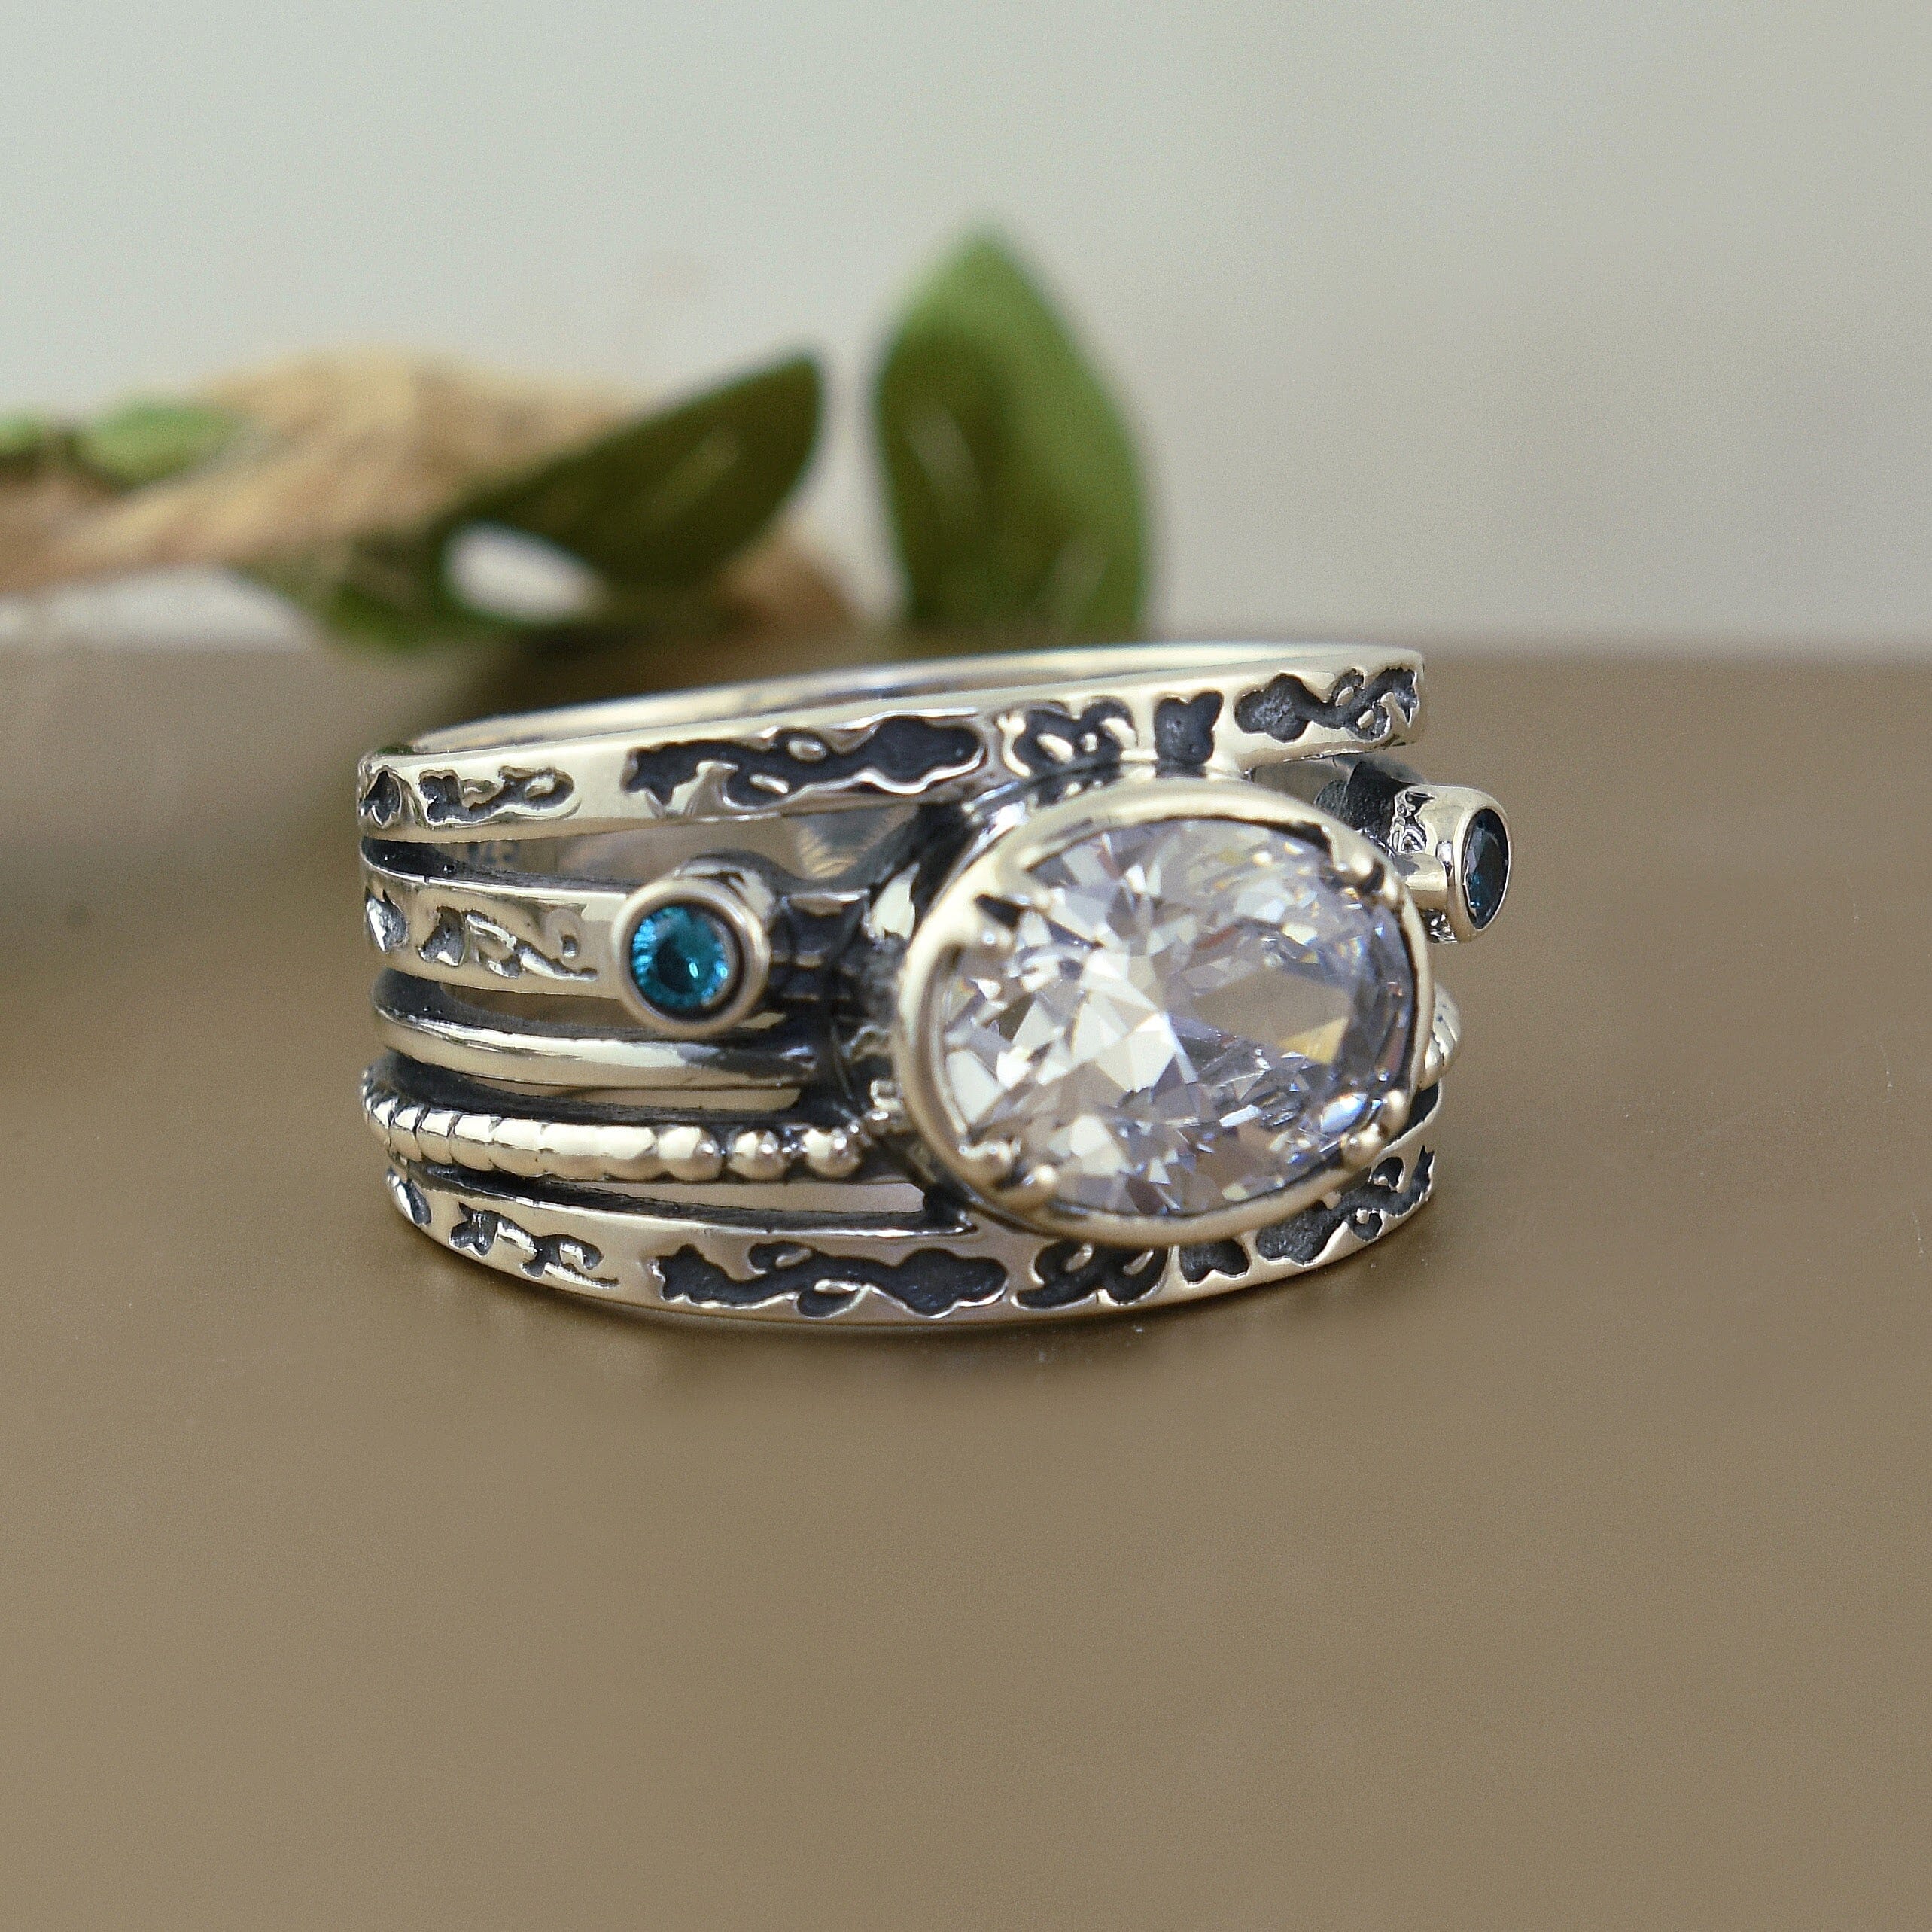 Sterling silver ring with oval shaped clear cz and round blue cz accents stones